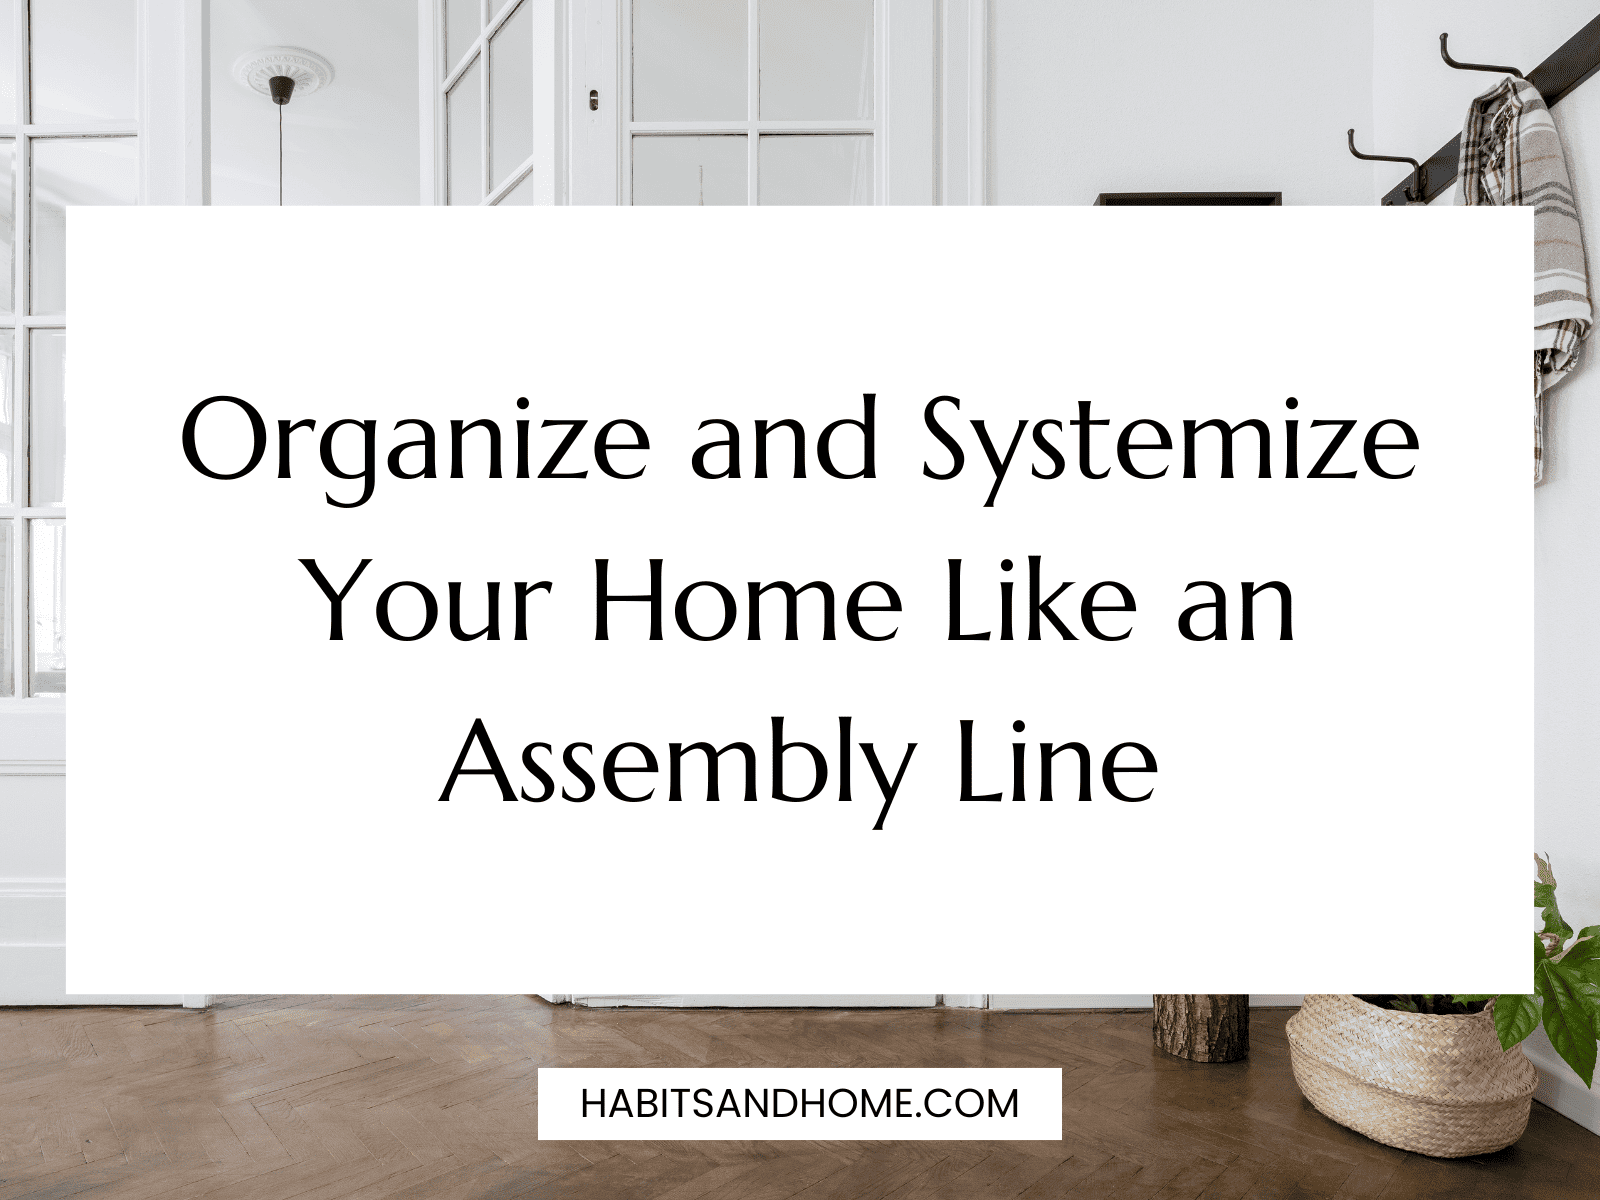 https://habitsandhome.com/wp-content/uploads/2023/02/Organize-and-Systemize-Your-Home-Like-an-Assembly-Line.png